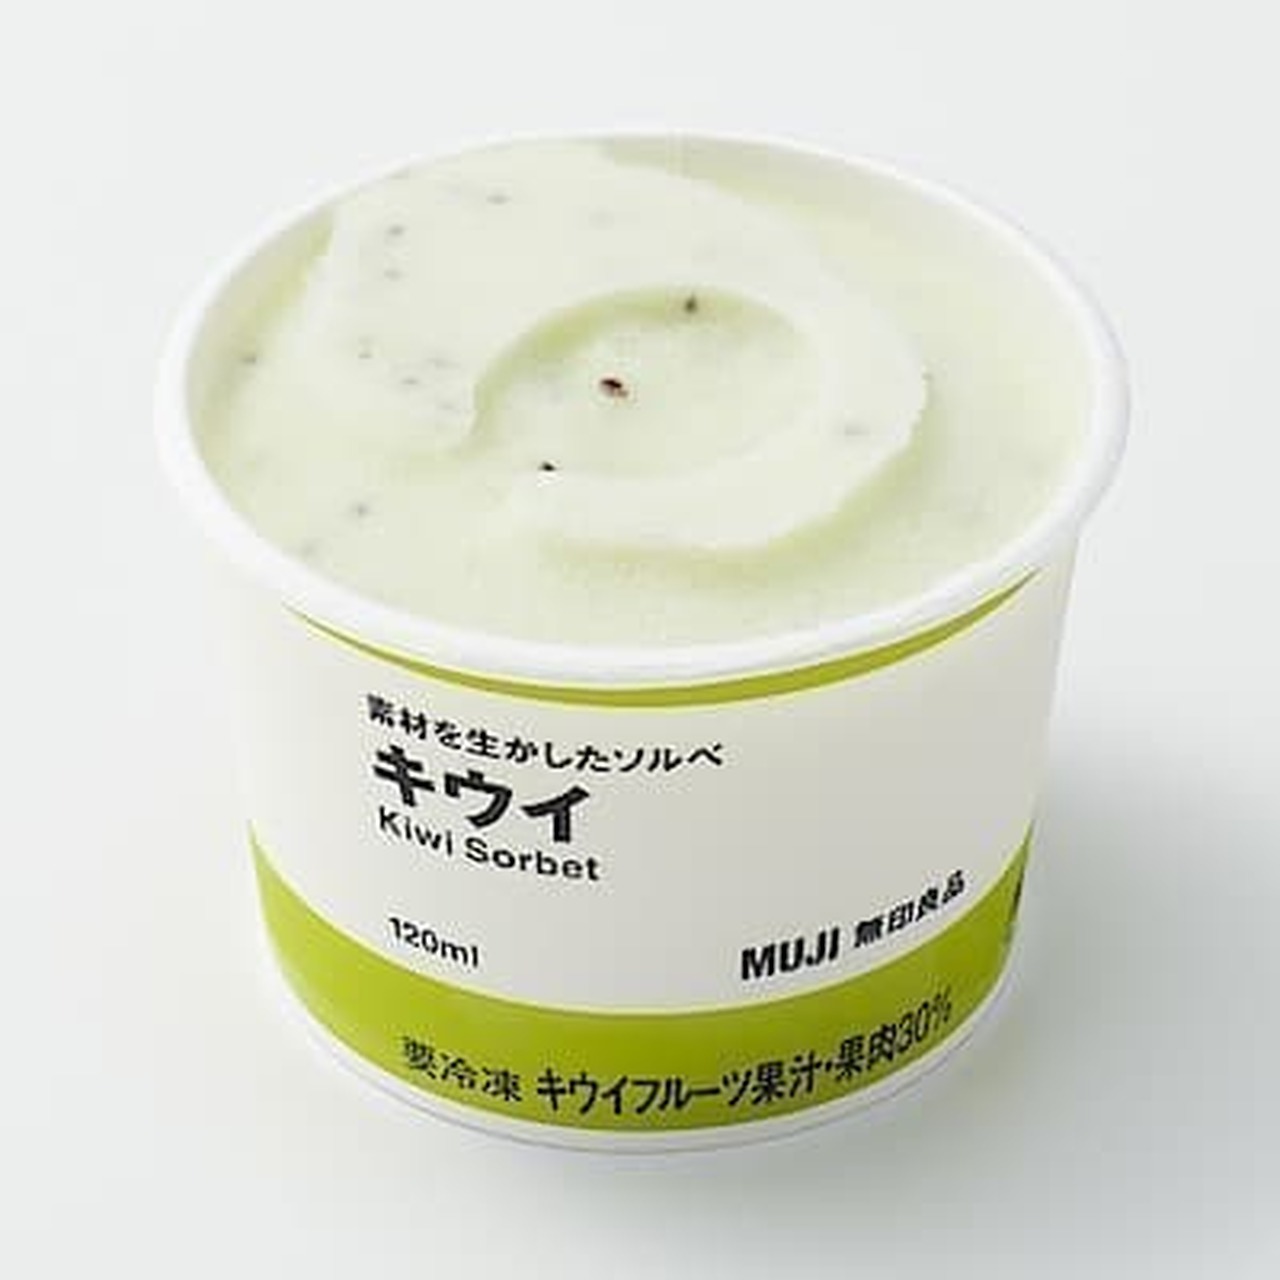 MUJI "Sorbet Kiwi that makes the best use of materials"